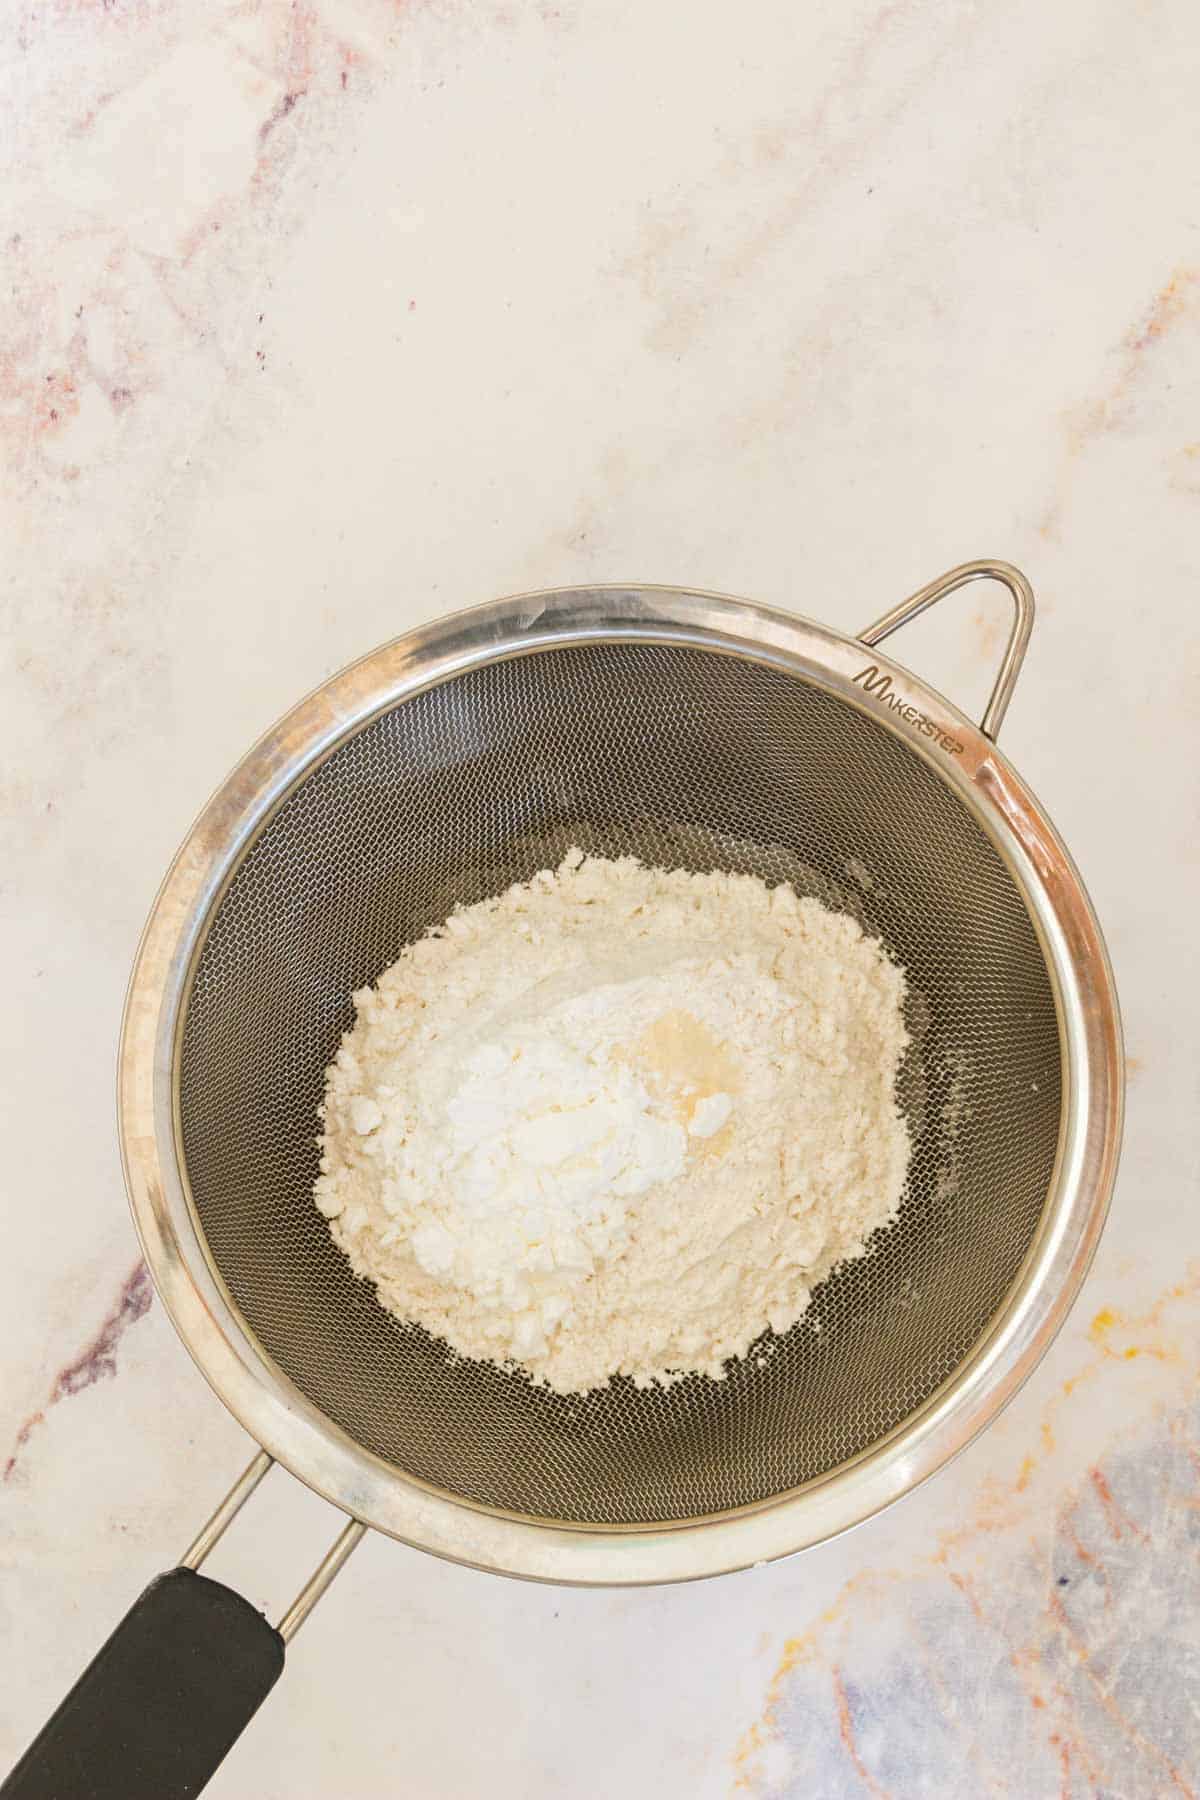 Flour and dry ingredients are passed through a sifter.